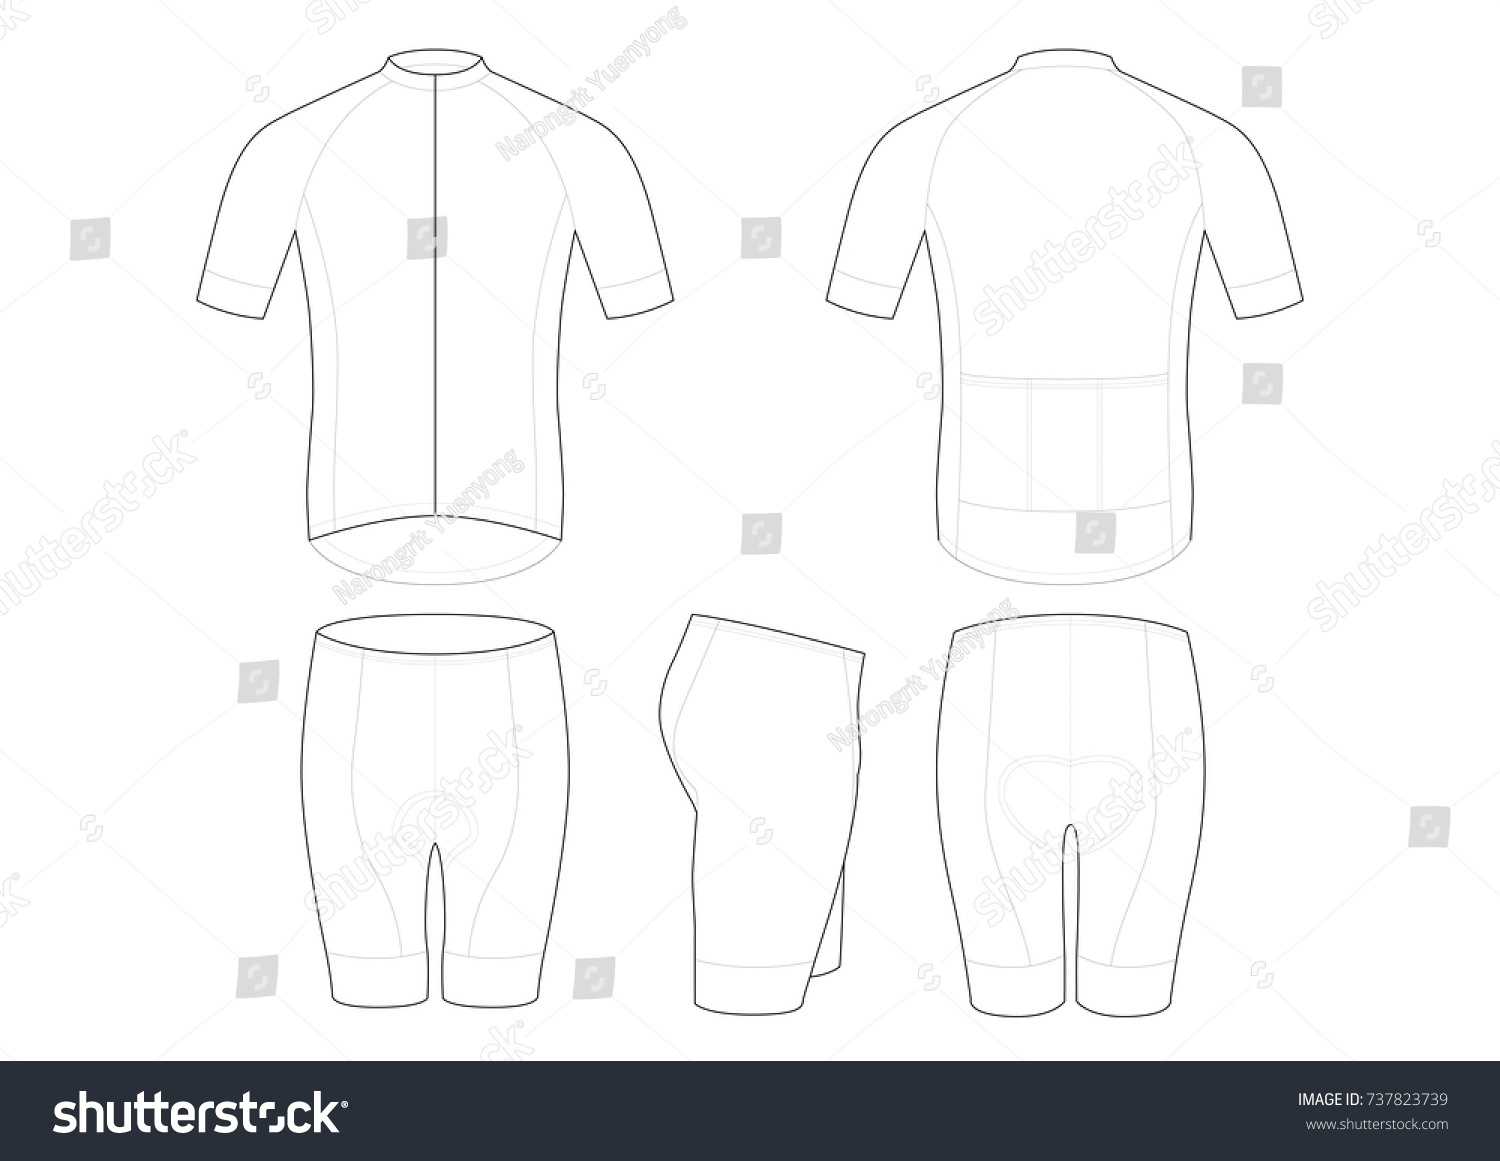 Cycling Jersey Template Design | Royalty Free Stock Image Pertaining To Blank Cycling Jersey Template